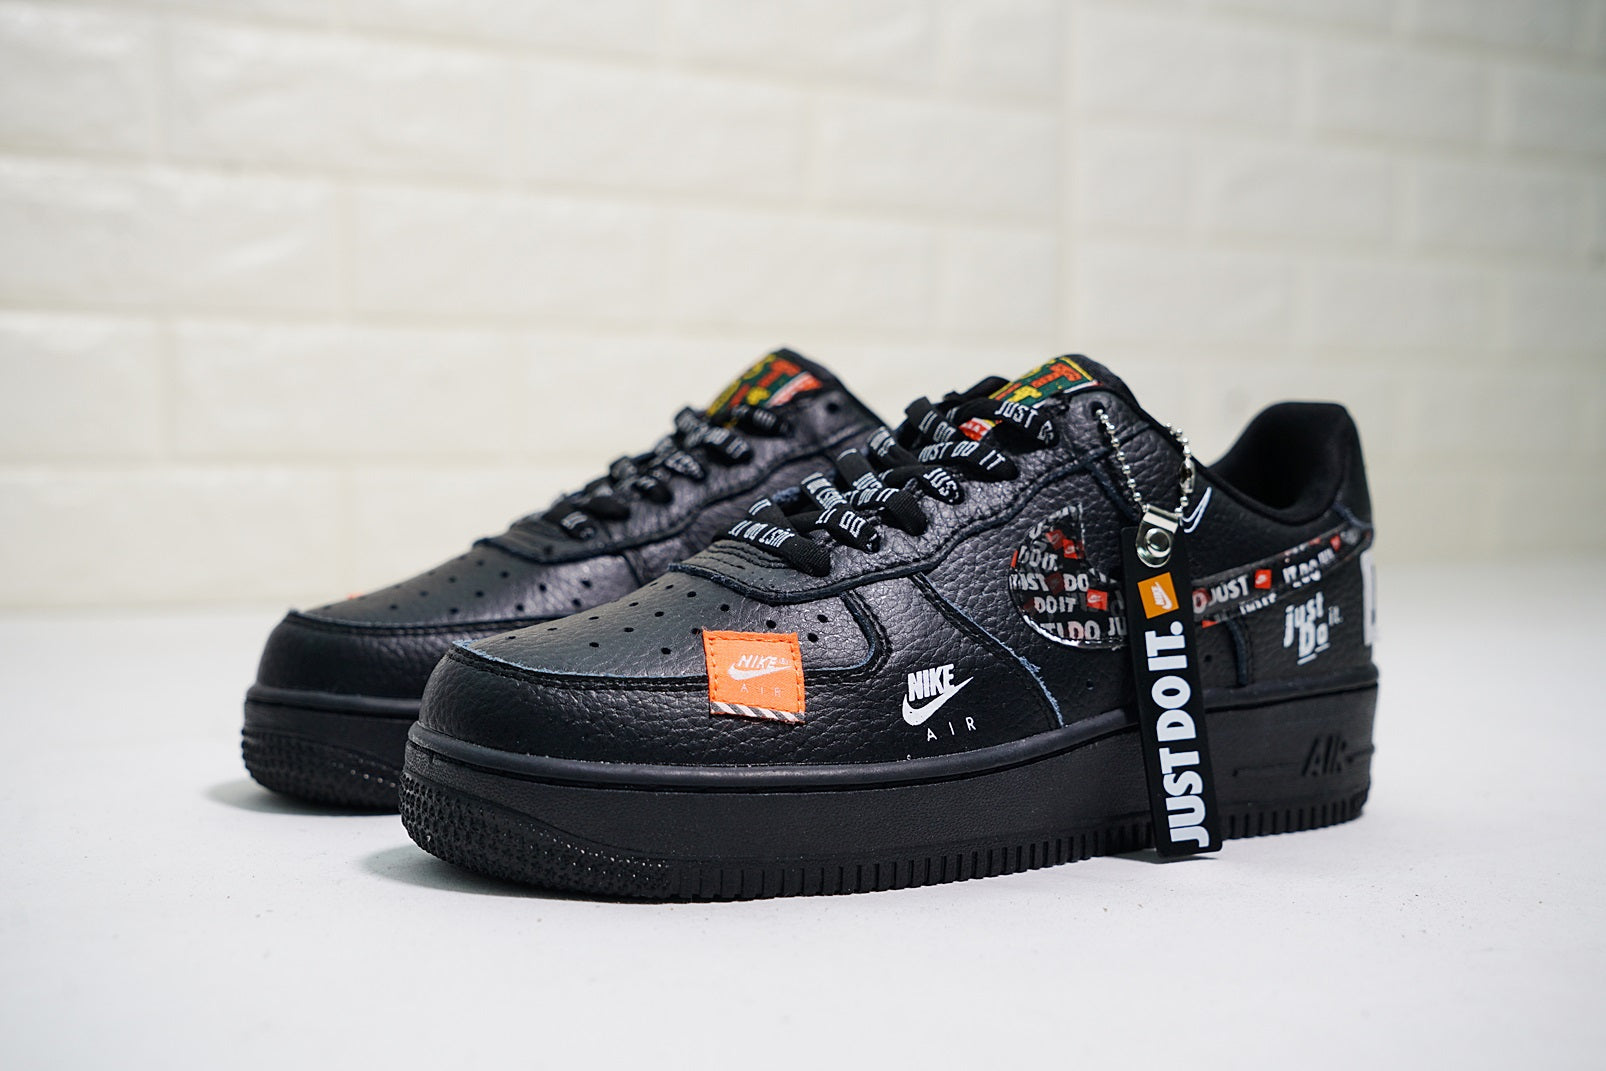 Air Force 1 Low “Just do it” - whatever on 